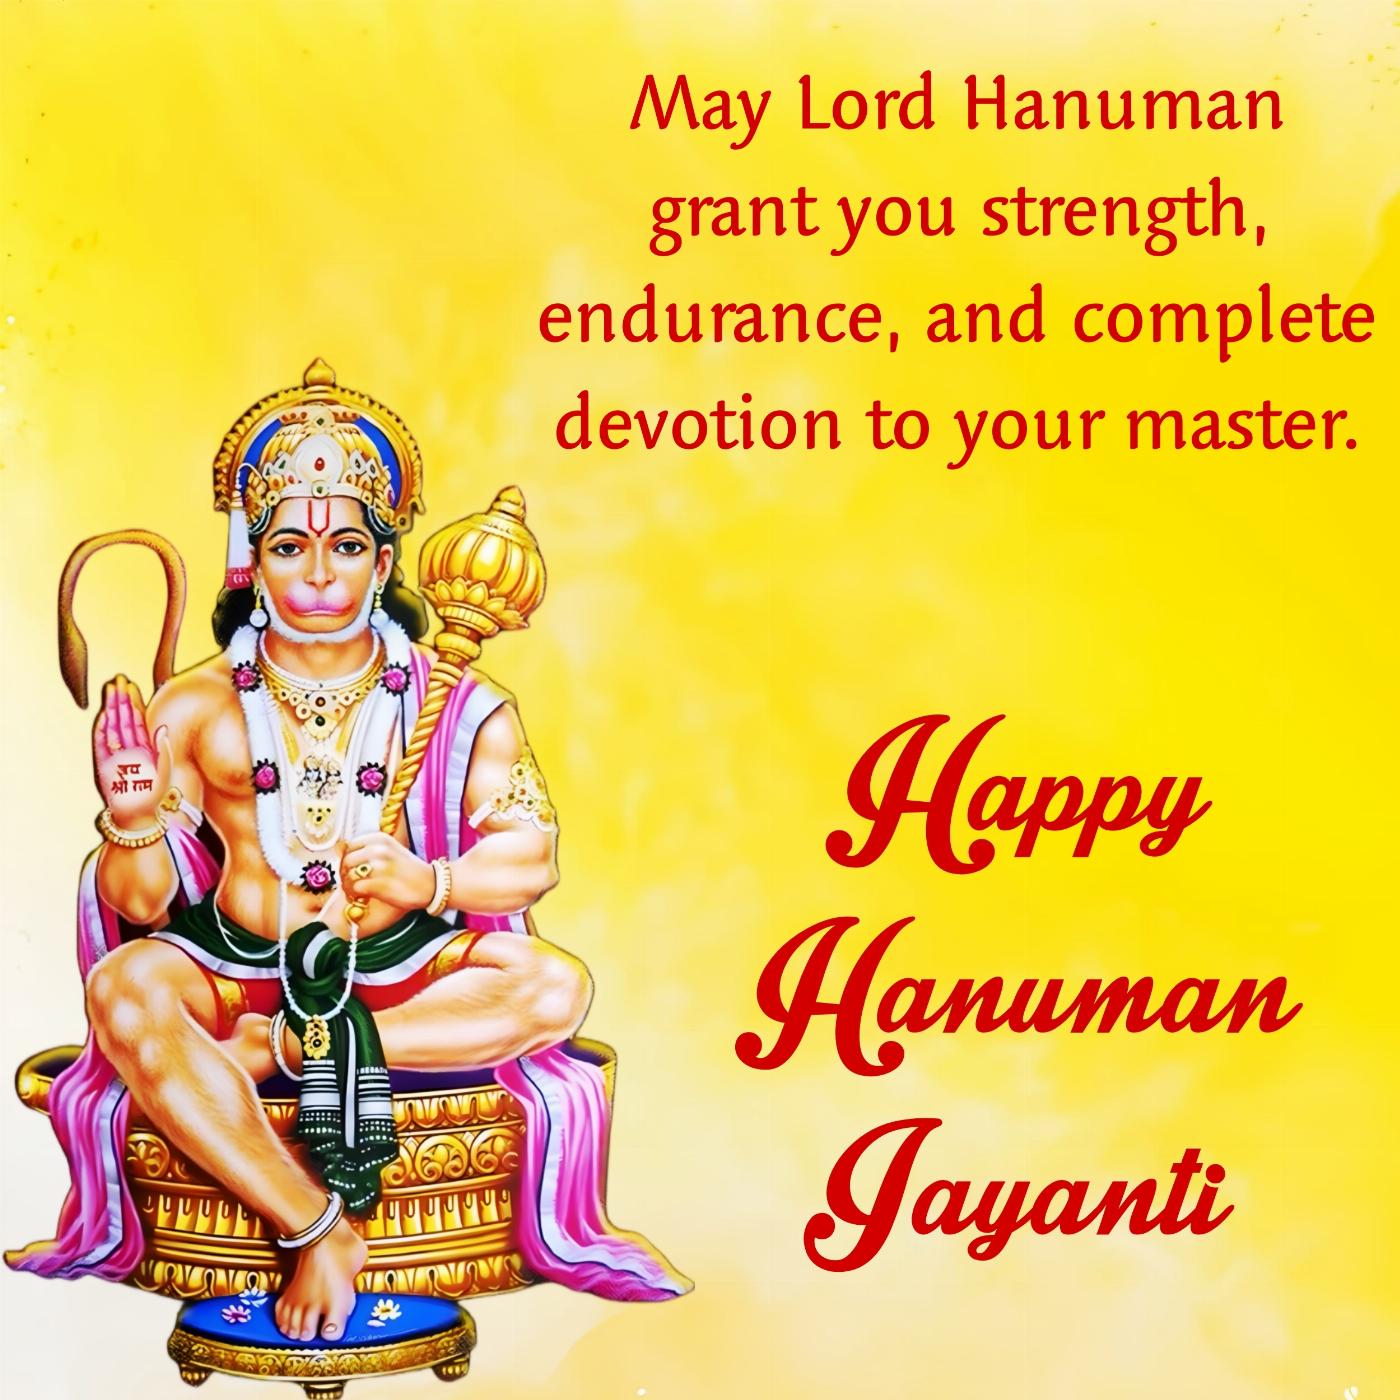 May Lord Hanuman grant you strength endurance and complete devotion